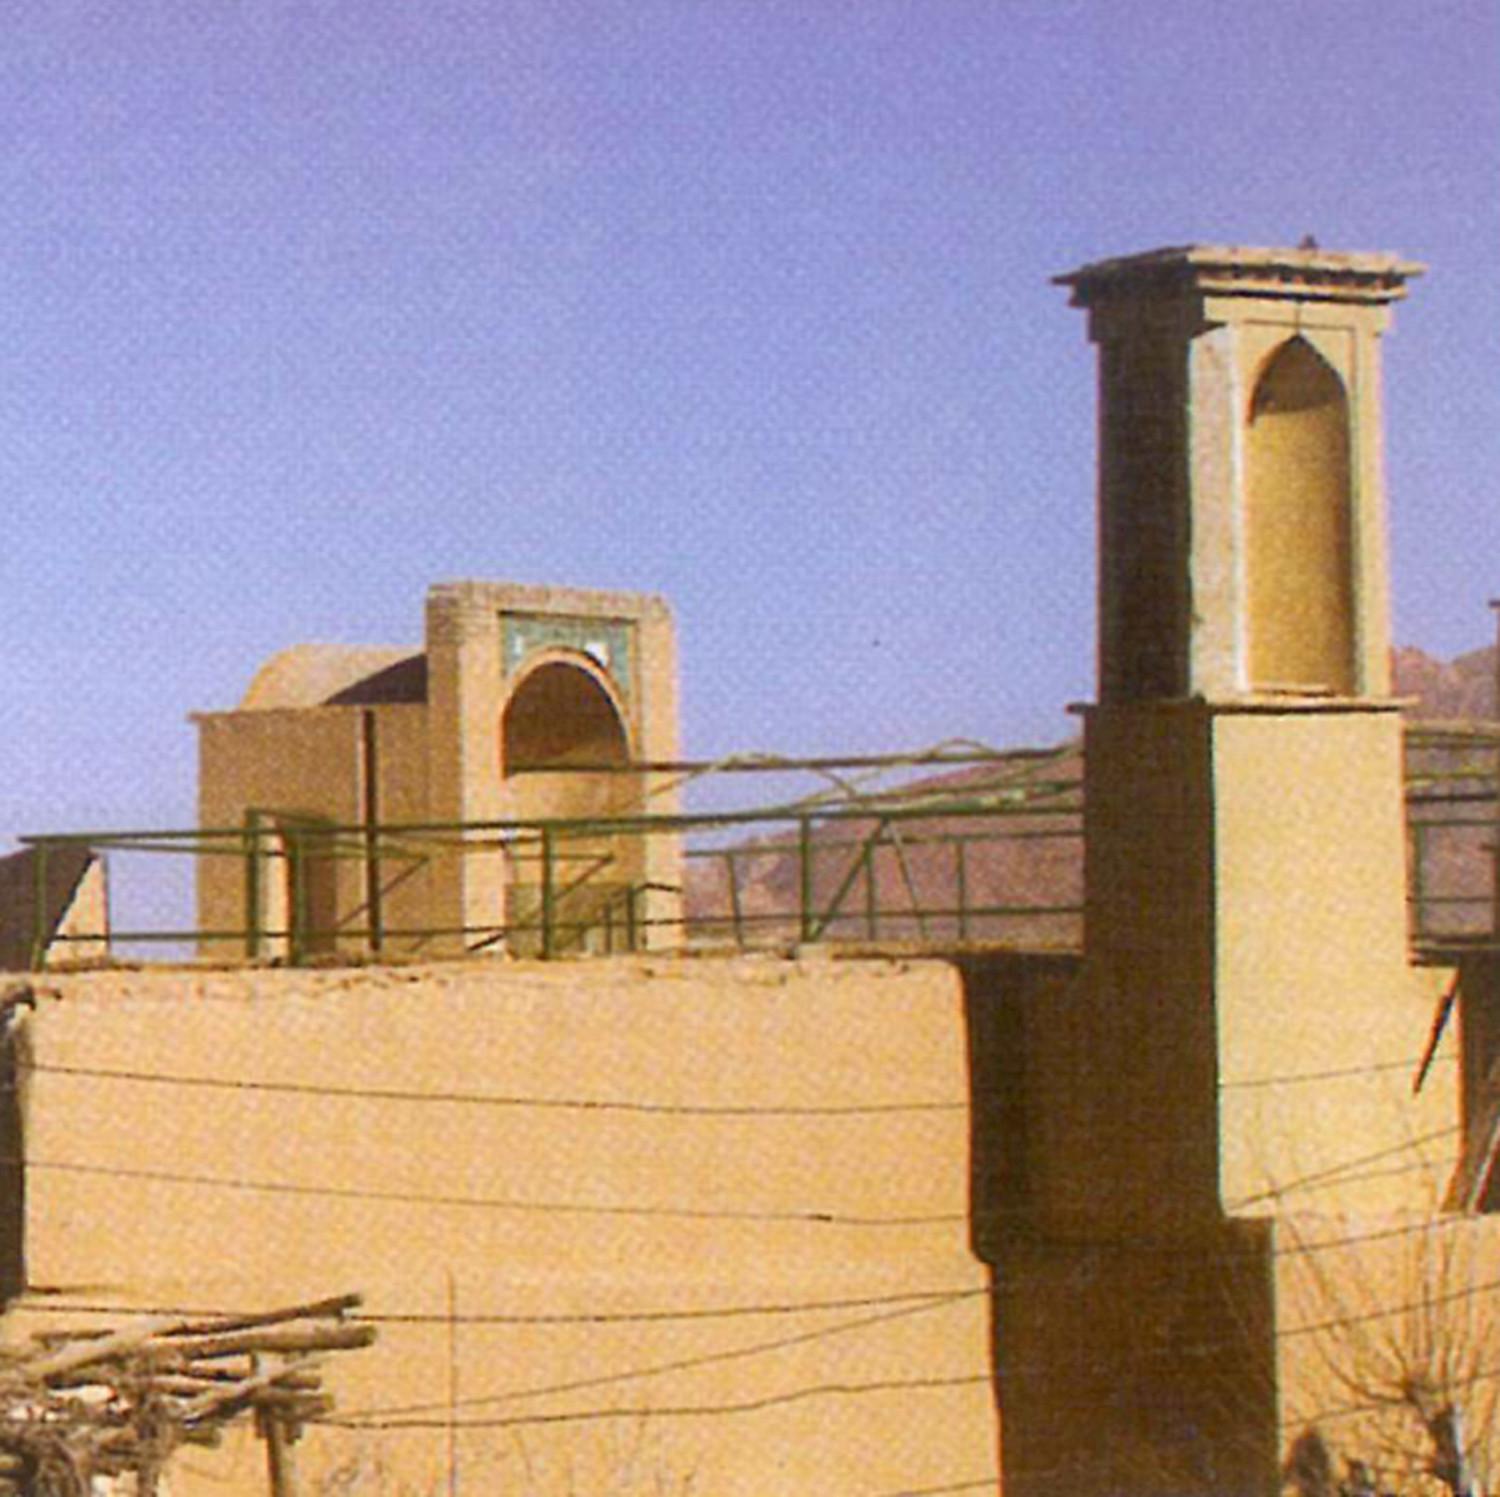 The perspective of the Masjed Jame “Windcatcher ” after revitalization